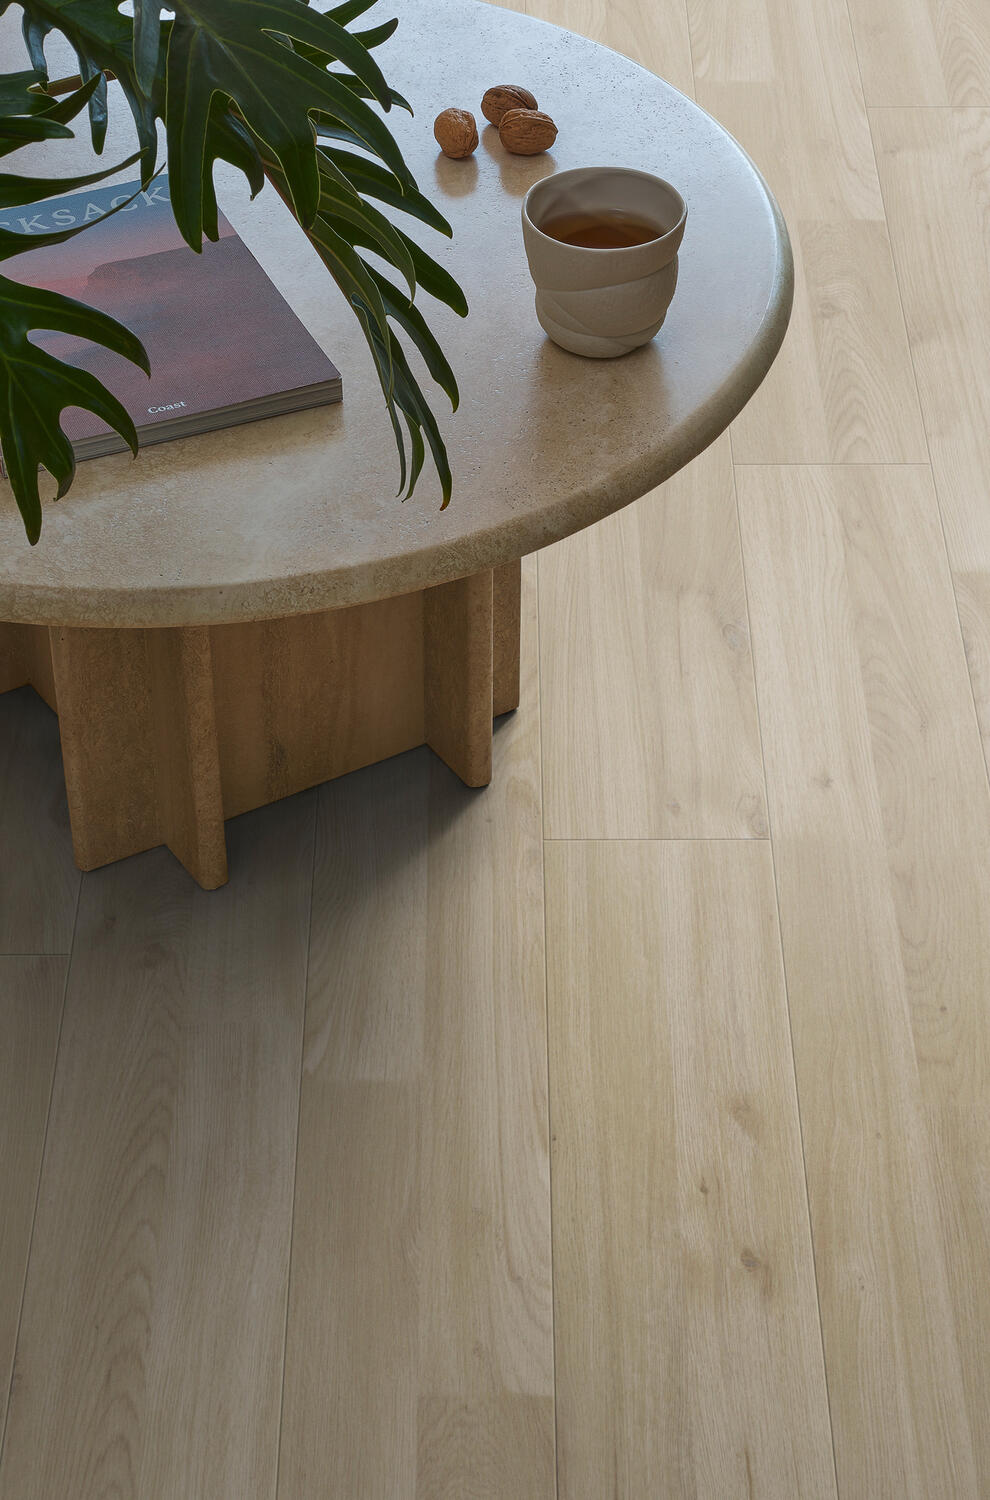 Laminate Flooring Guide: What to Know Before You Install - This